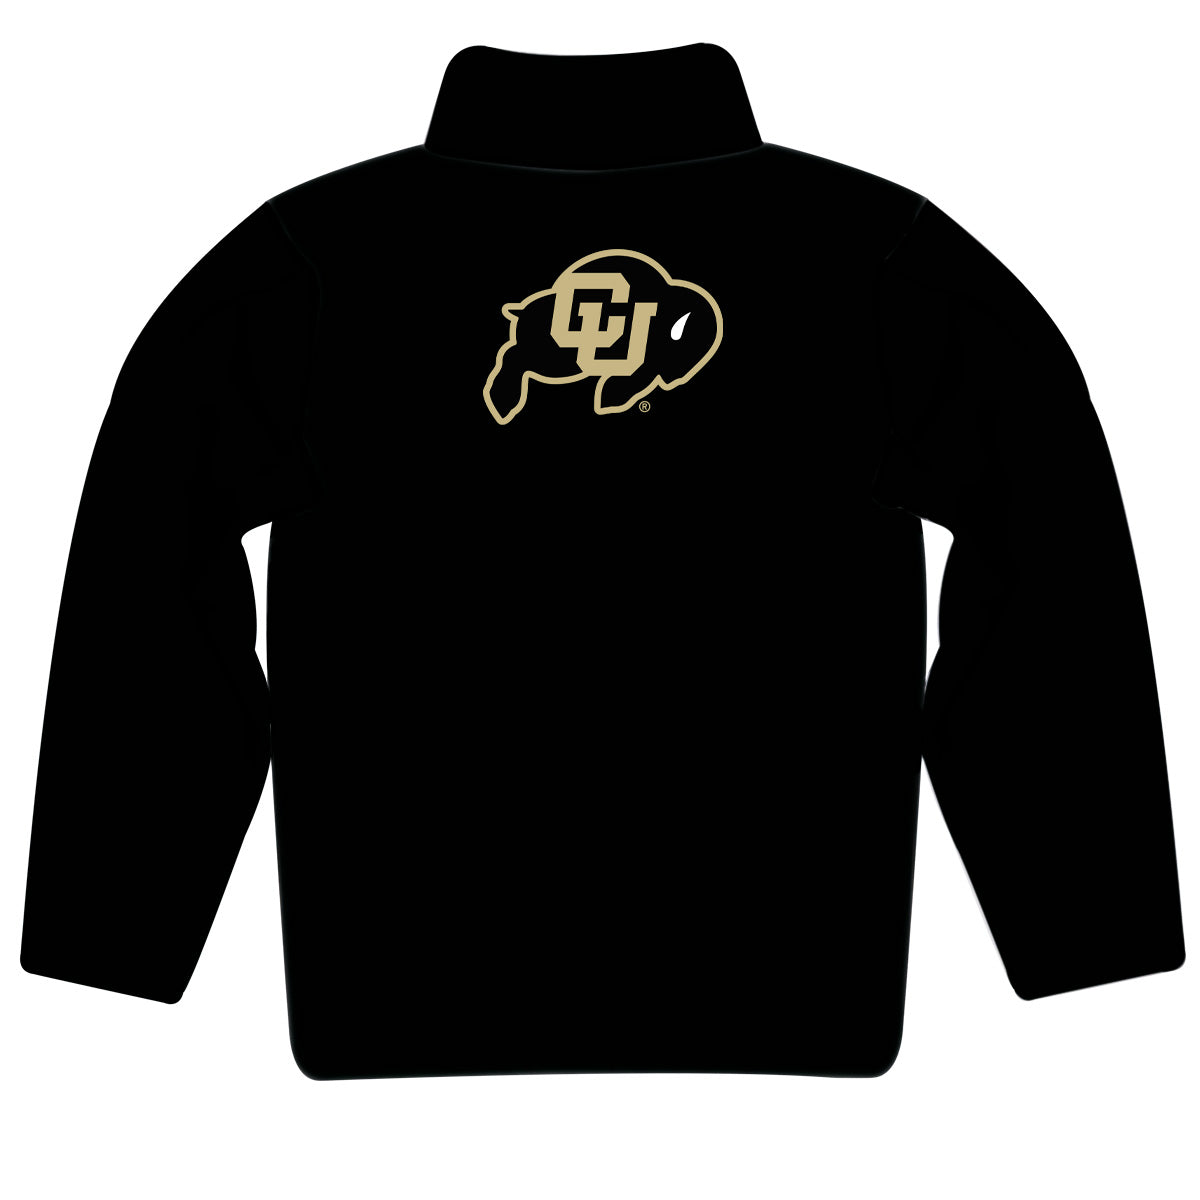 Colorado Buffaloes CU Game Day Solid Black Quarter Zip Pullover for Infants Toddlers by Vive La Fete